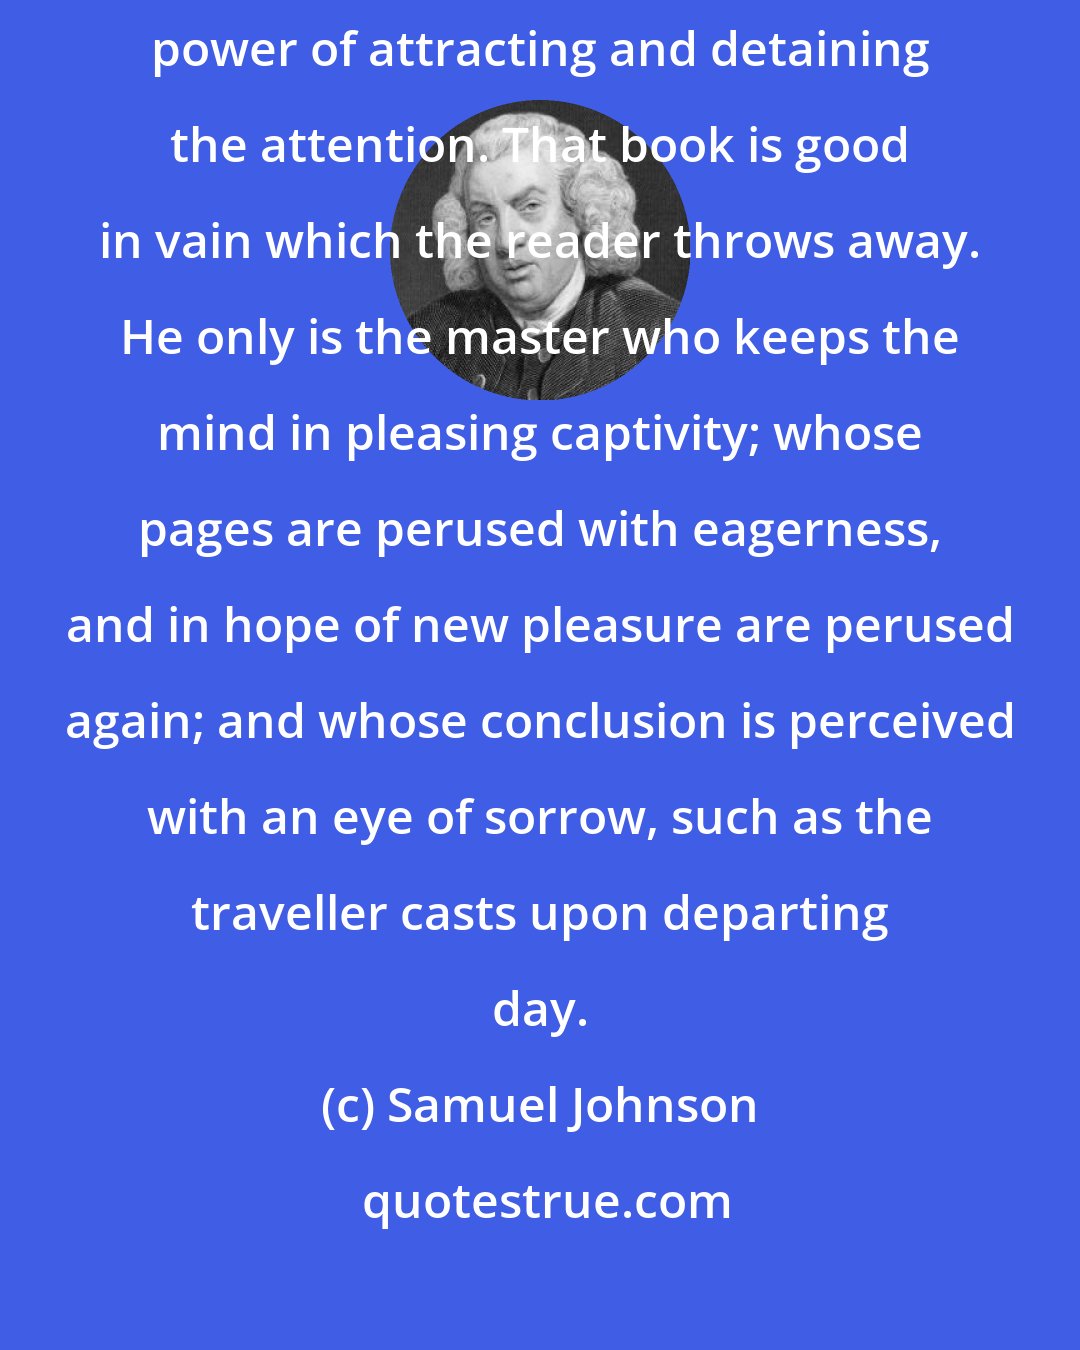 Samuel Johnson: Works of imagination excel by their allurement and delight; by their power of attracting and detaining the attention. That book is good in vain which the reader throws away. He only is the master who keeps the mind in pleasing captivity; whose pages are perused with eagerness, and in hope of new pleasure are perused again; and whose conclusion is perceived with an eye of sorrow, such as the traveller casts upon departing day.